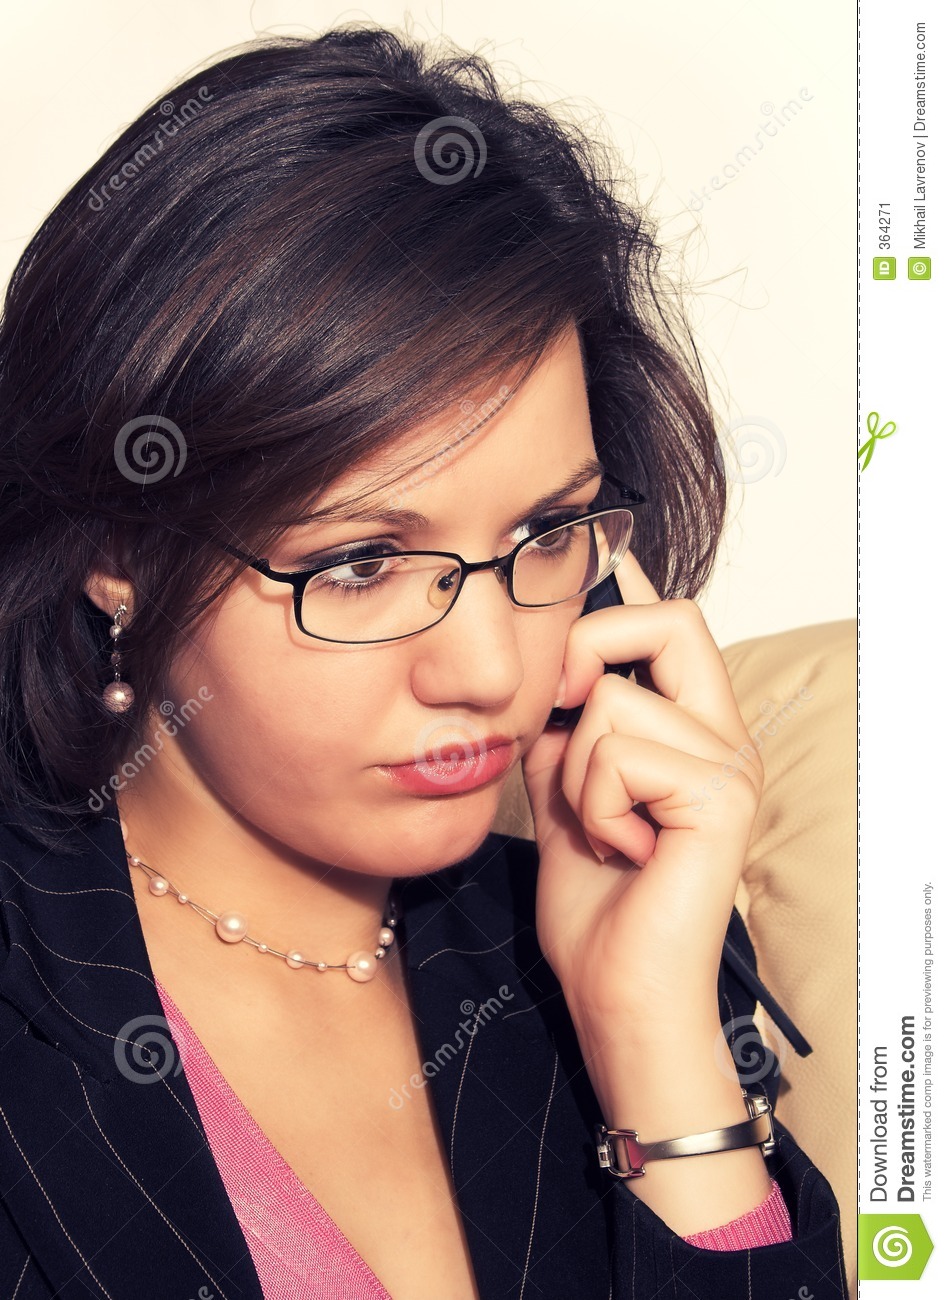 Young Lady Talking On The Phone Stock Image   Image  364271